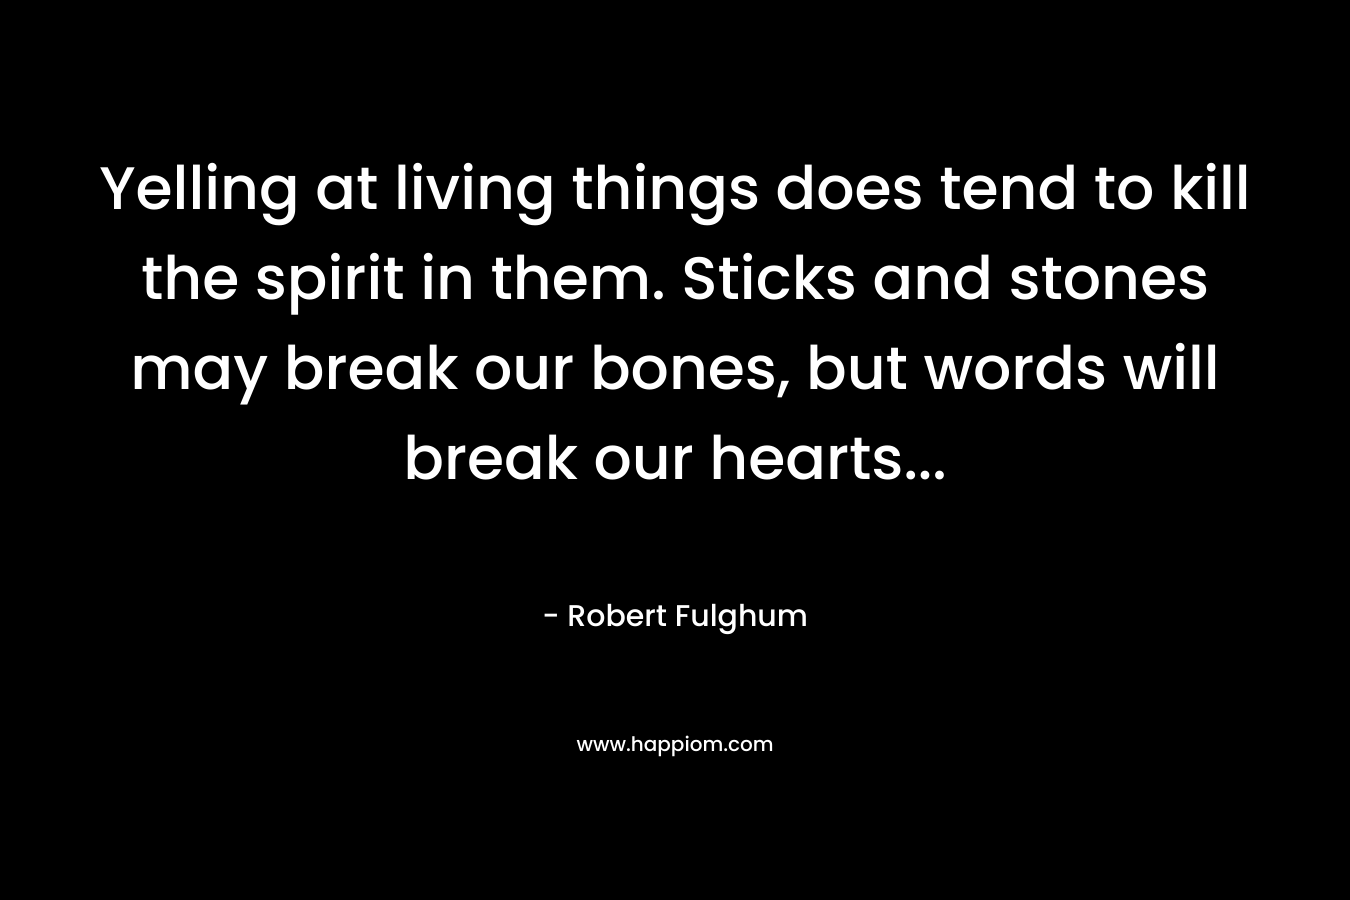 Yelling at living things does tend to kill the spirit in them. Sticks and stones may break our bones, but words will break our hearts...